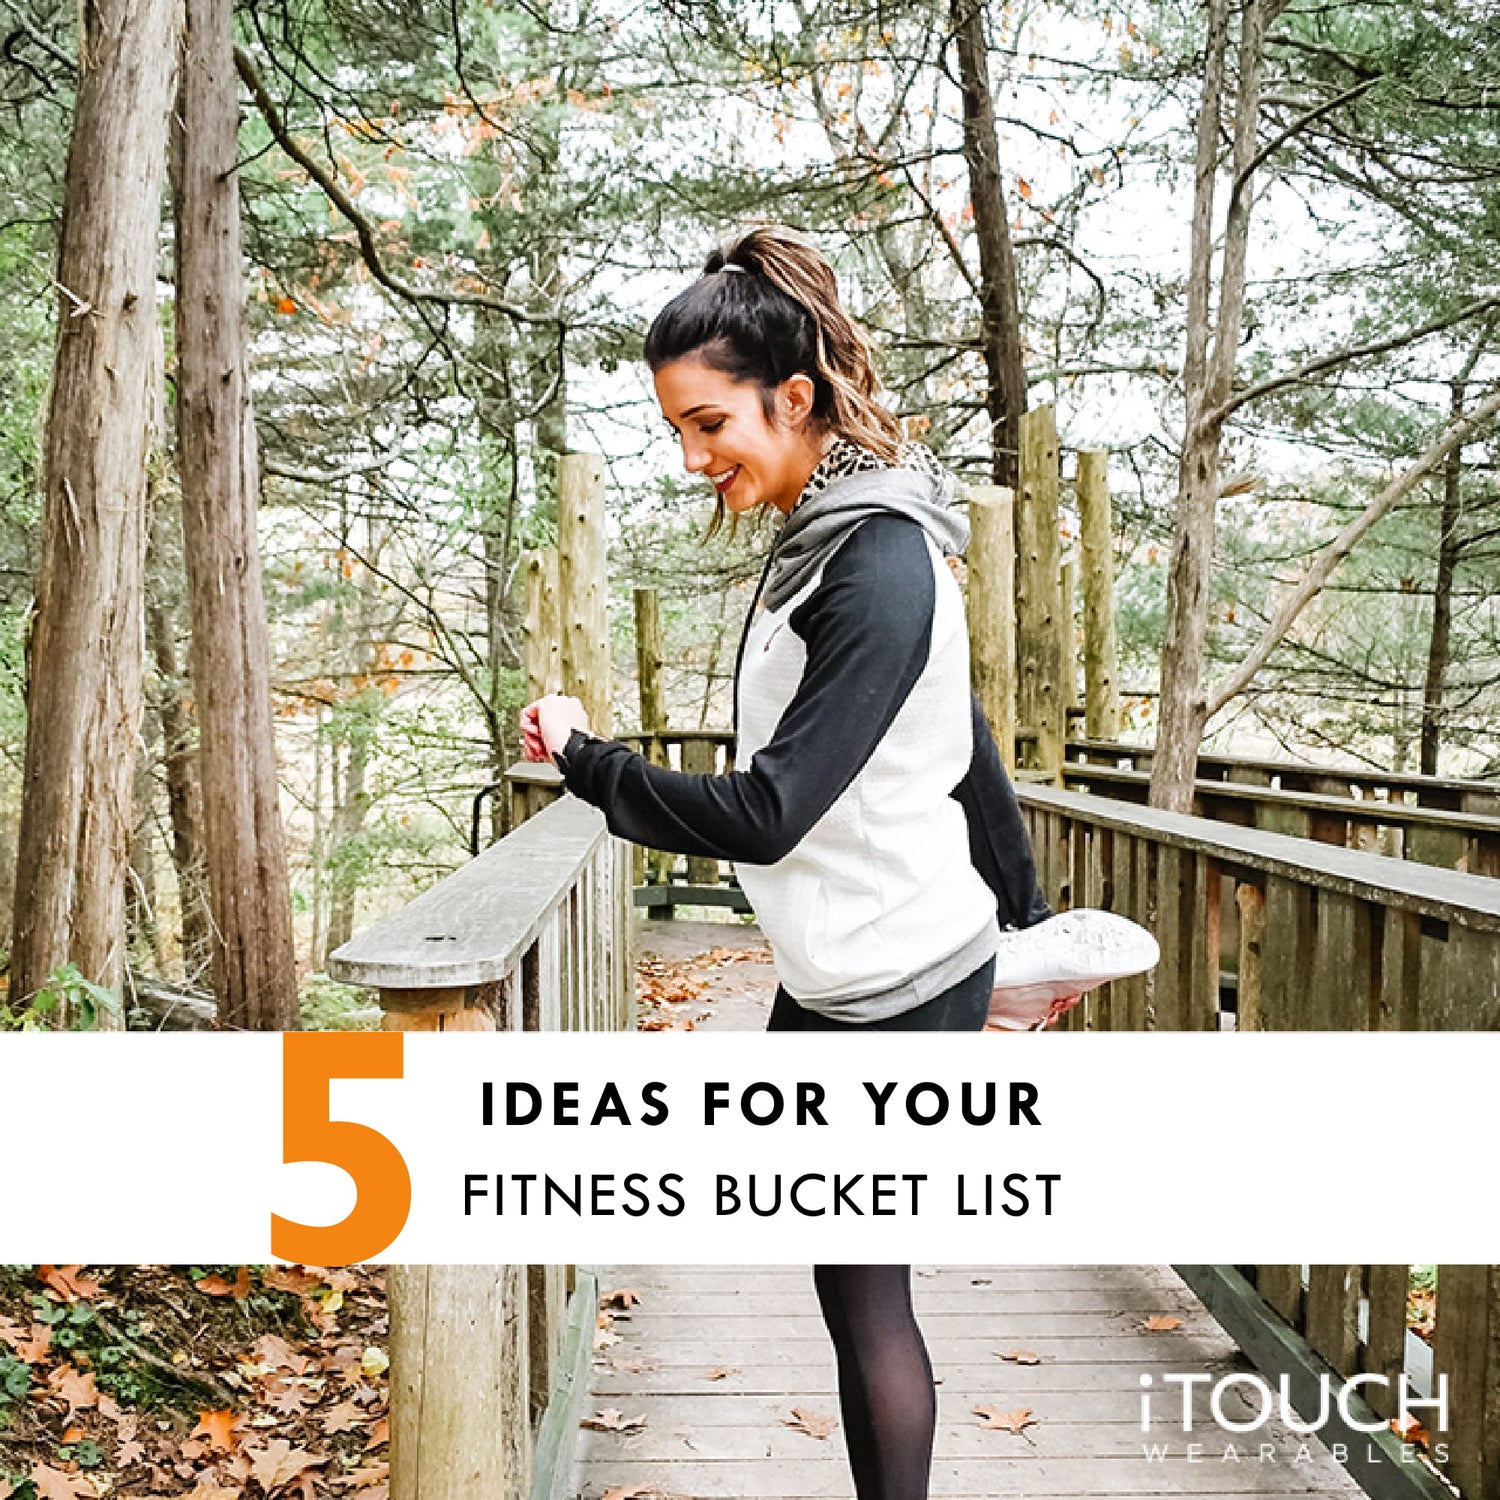 5 Ideas For Your Fitness Bucket List